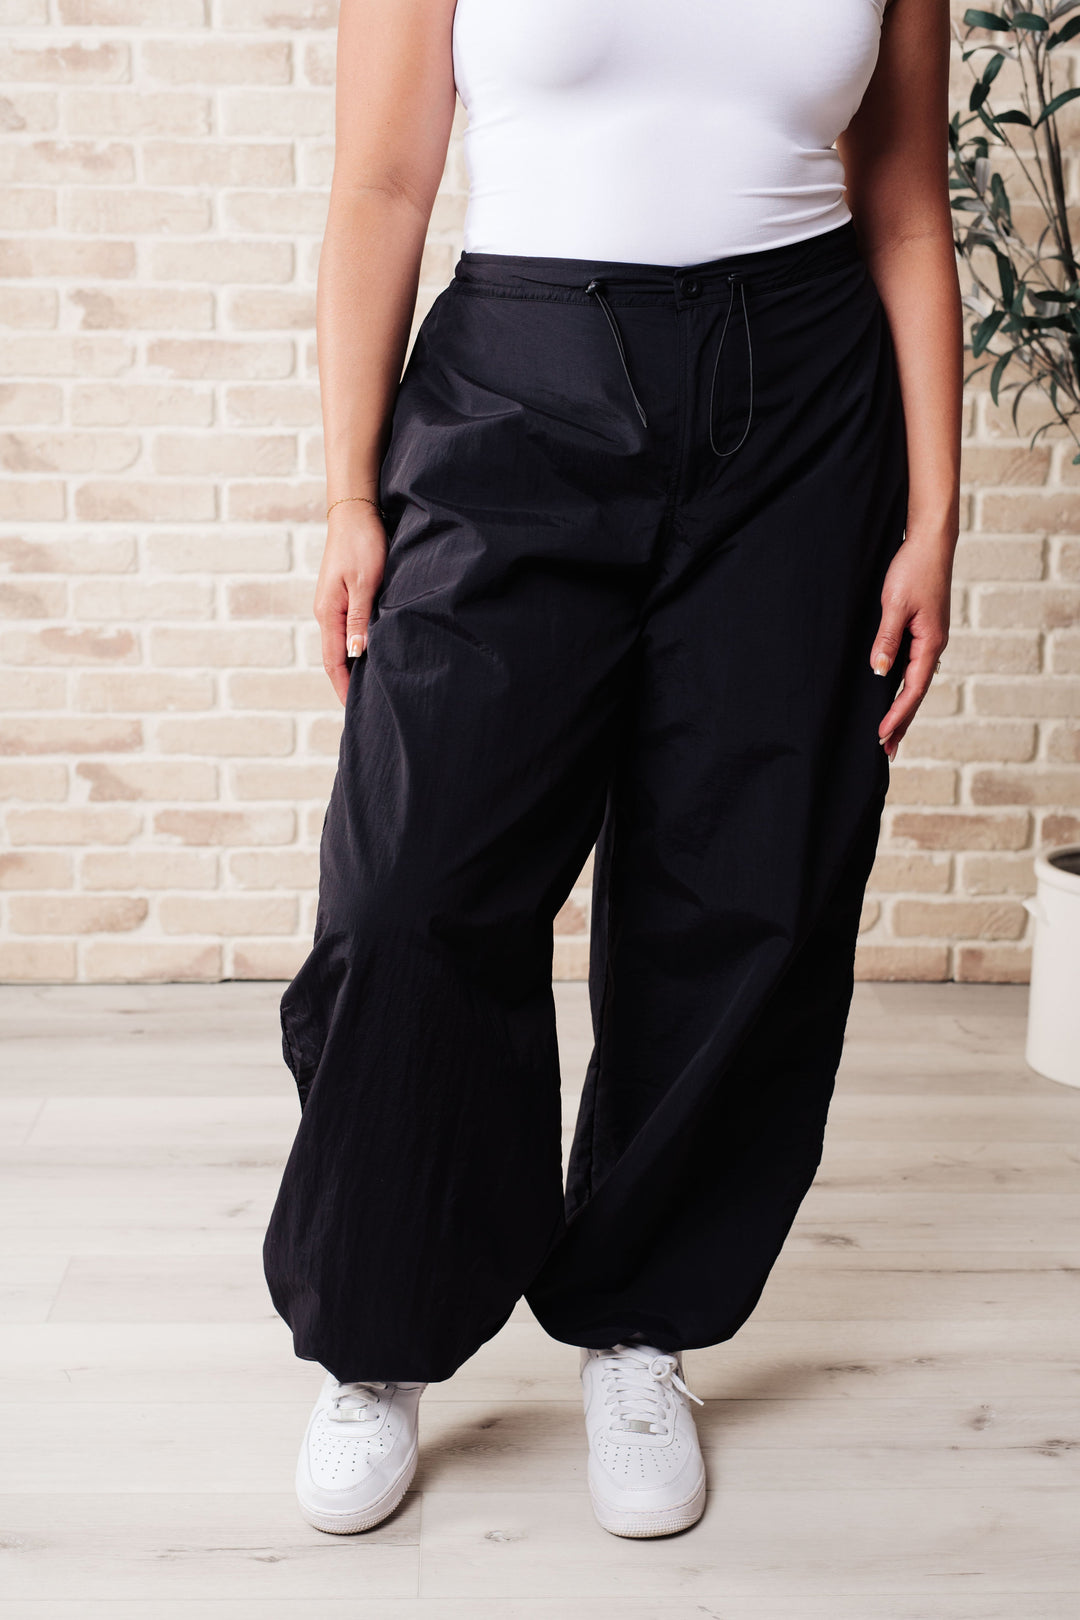 Step Up Joggers in Black-Pants-Inspired by Justeen-Women's Clothing Boutique